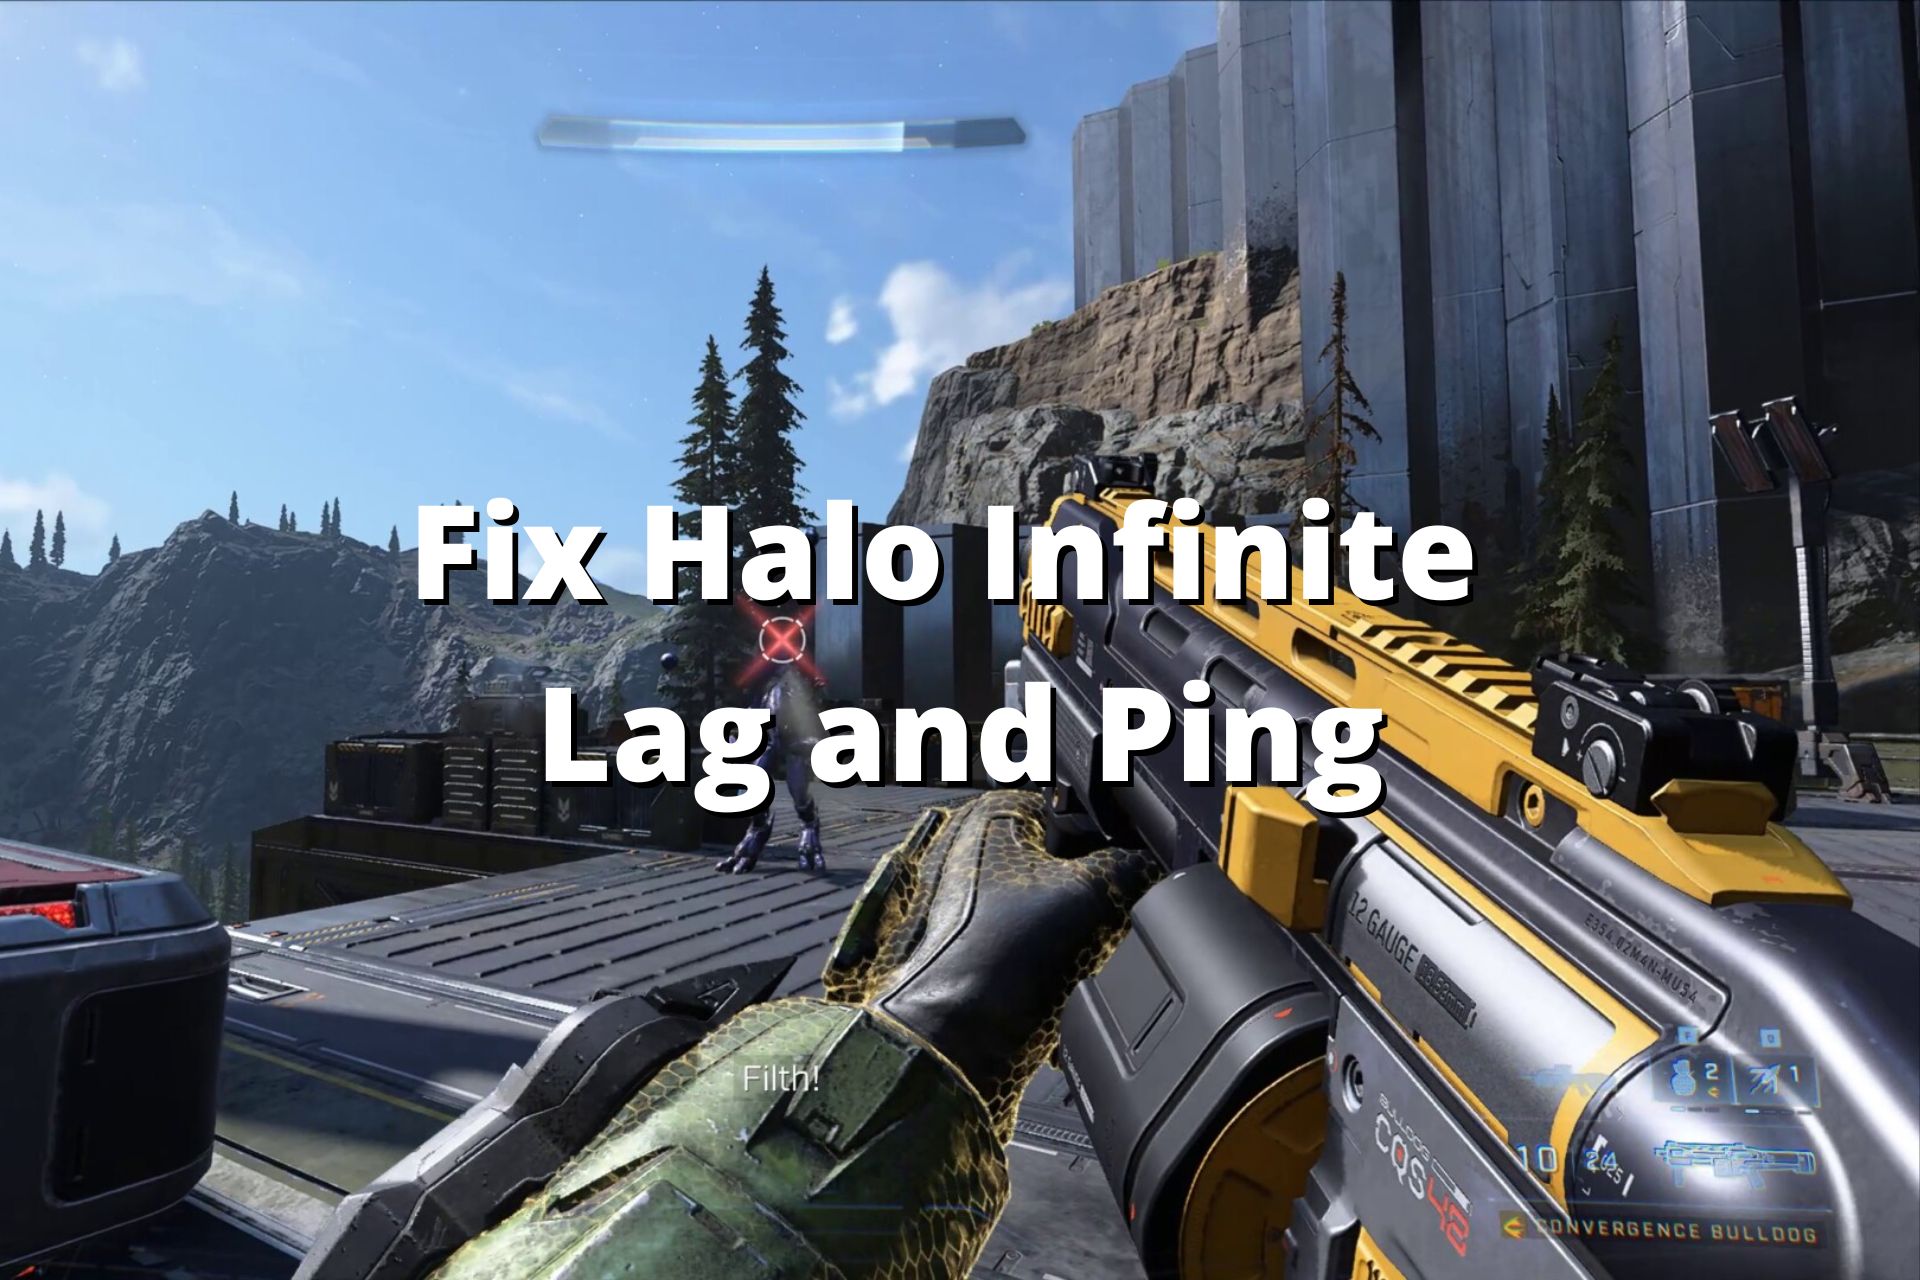 Get Rid of Halo Infinite Lag and Ping with This Full Fix